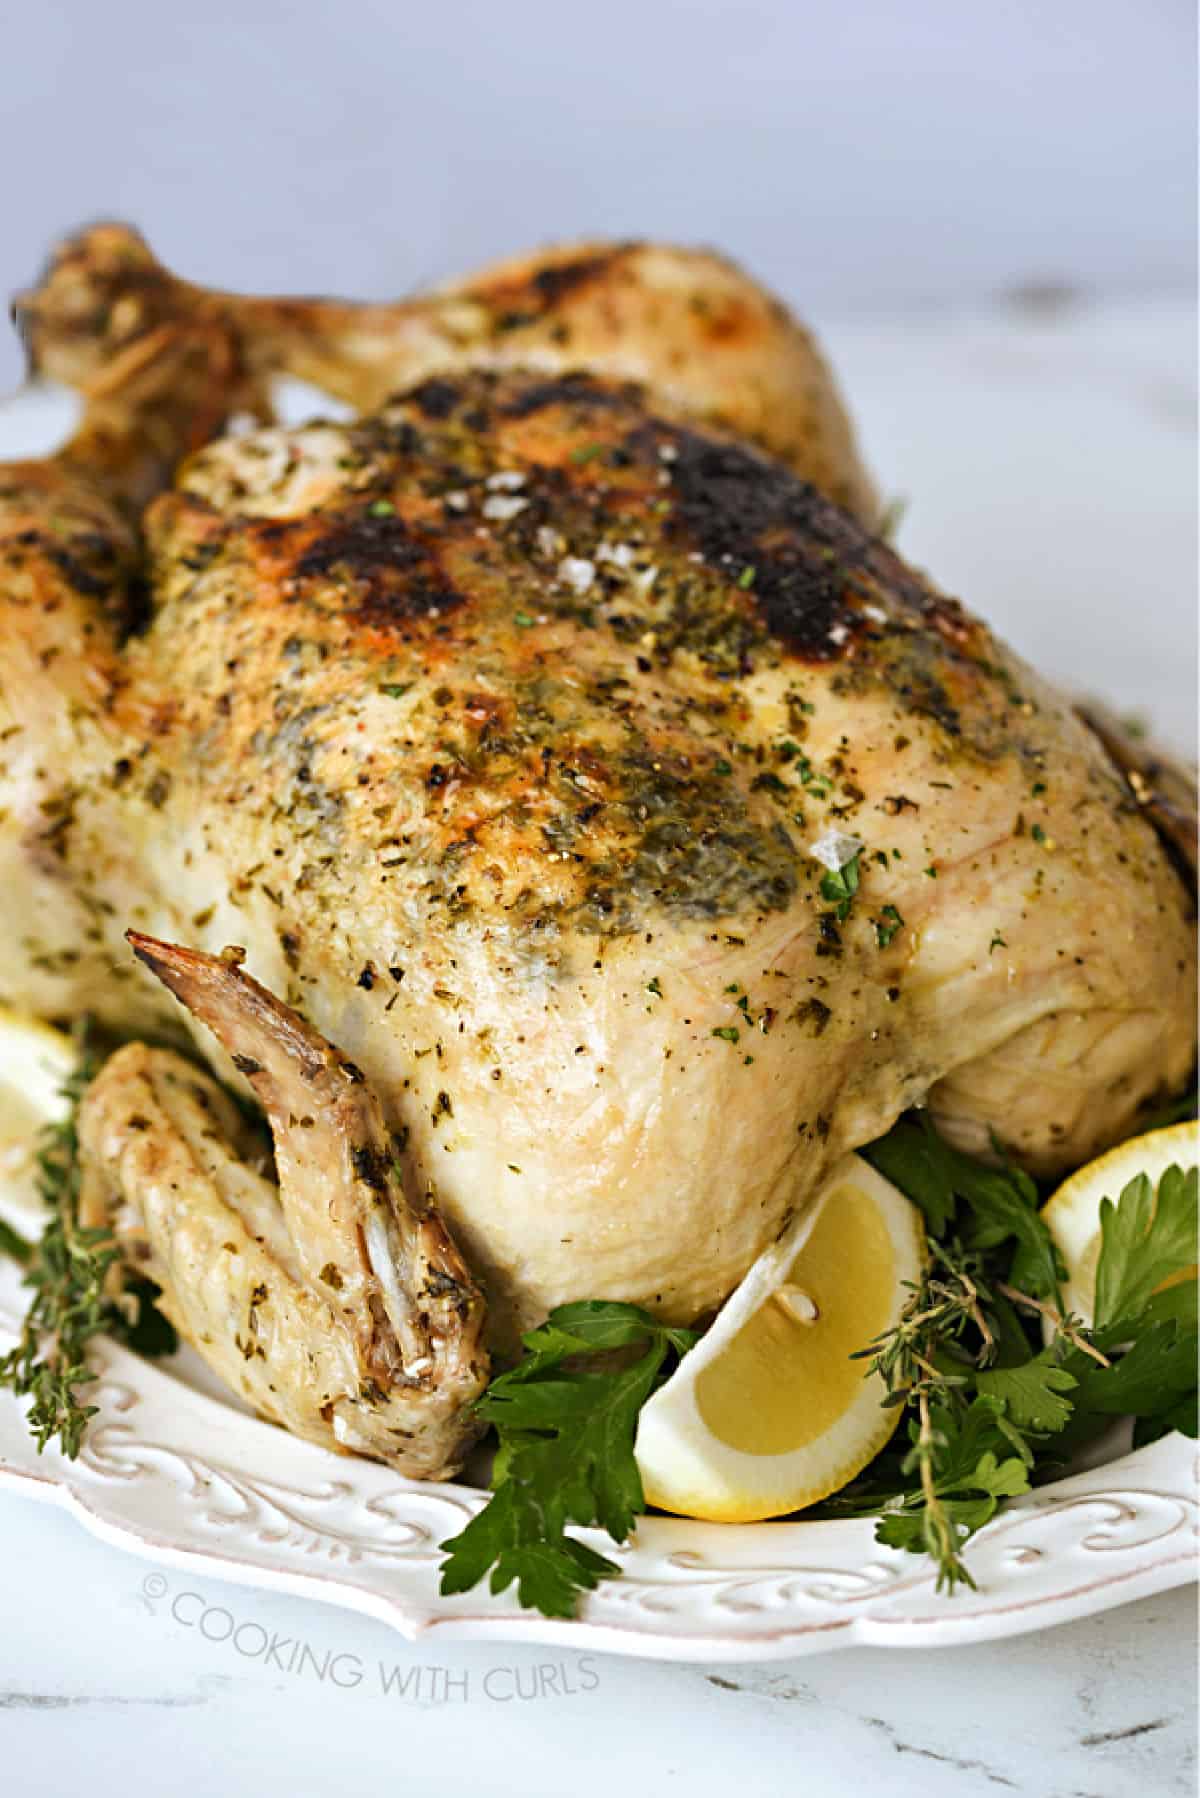 A close-up image of a whole chicken on a white platter surrounded by fresh herbs and lemon wedges.